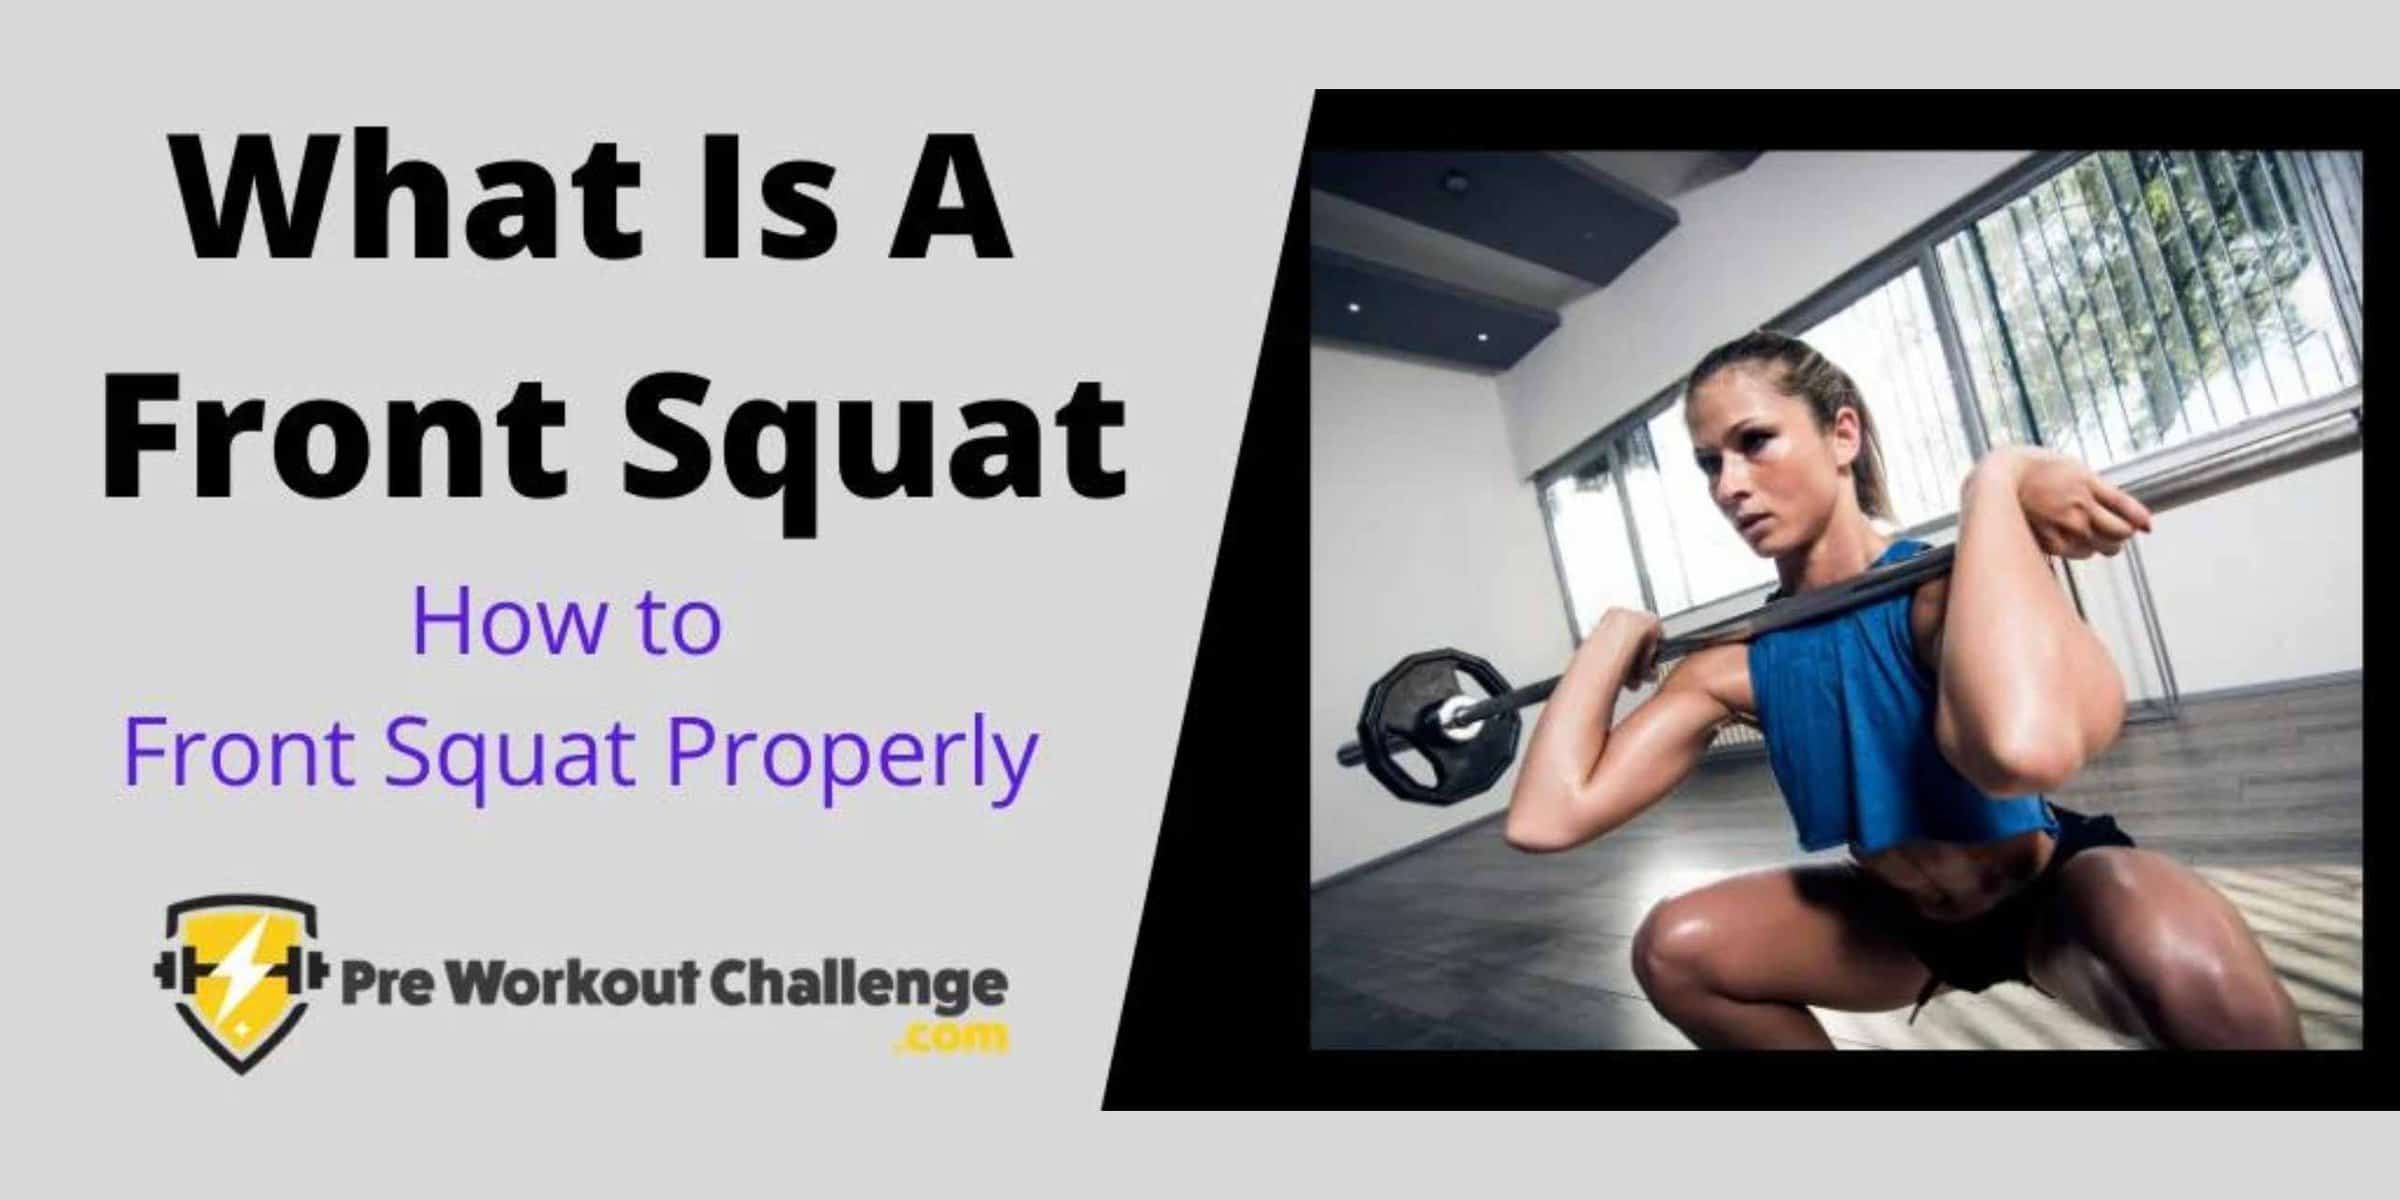 what is a front squat?